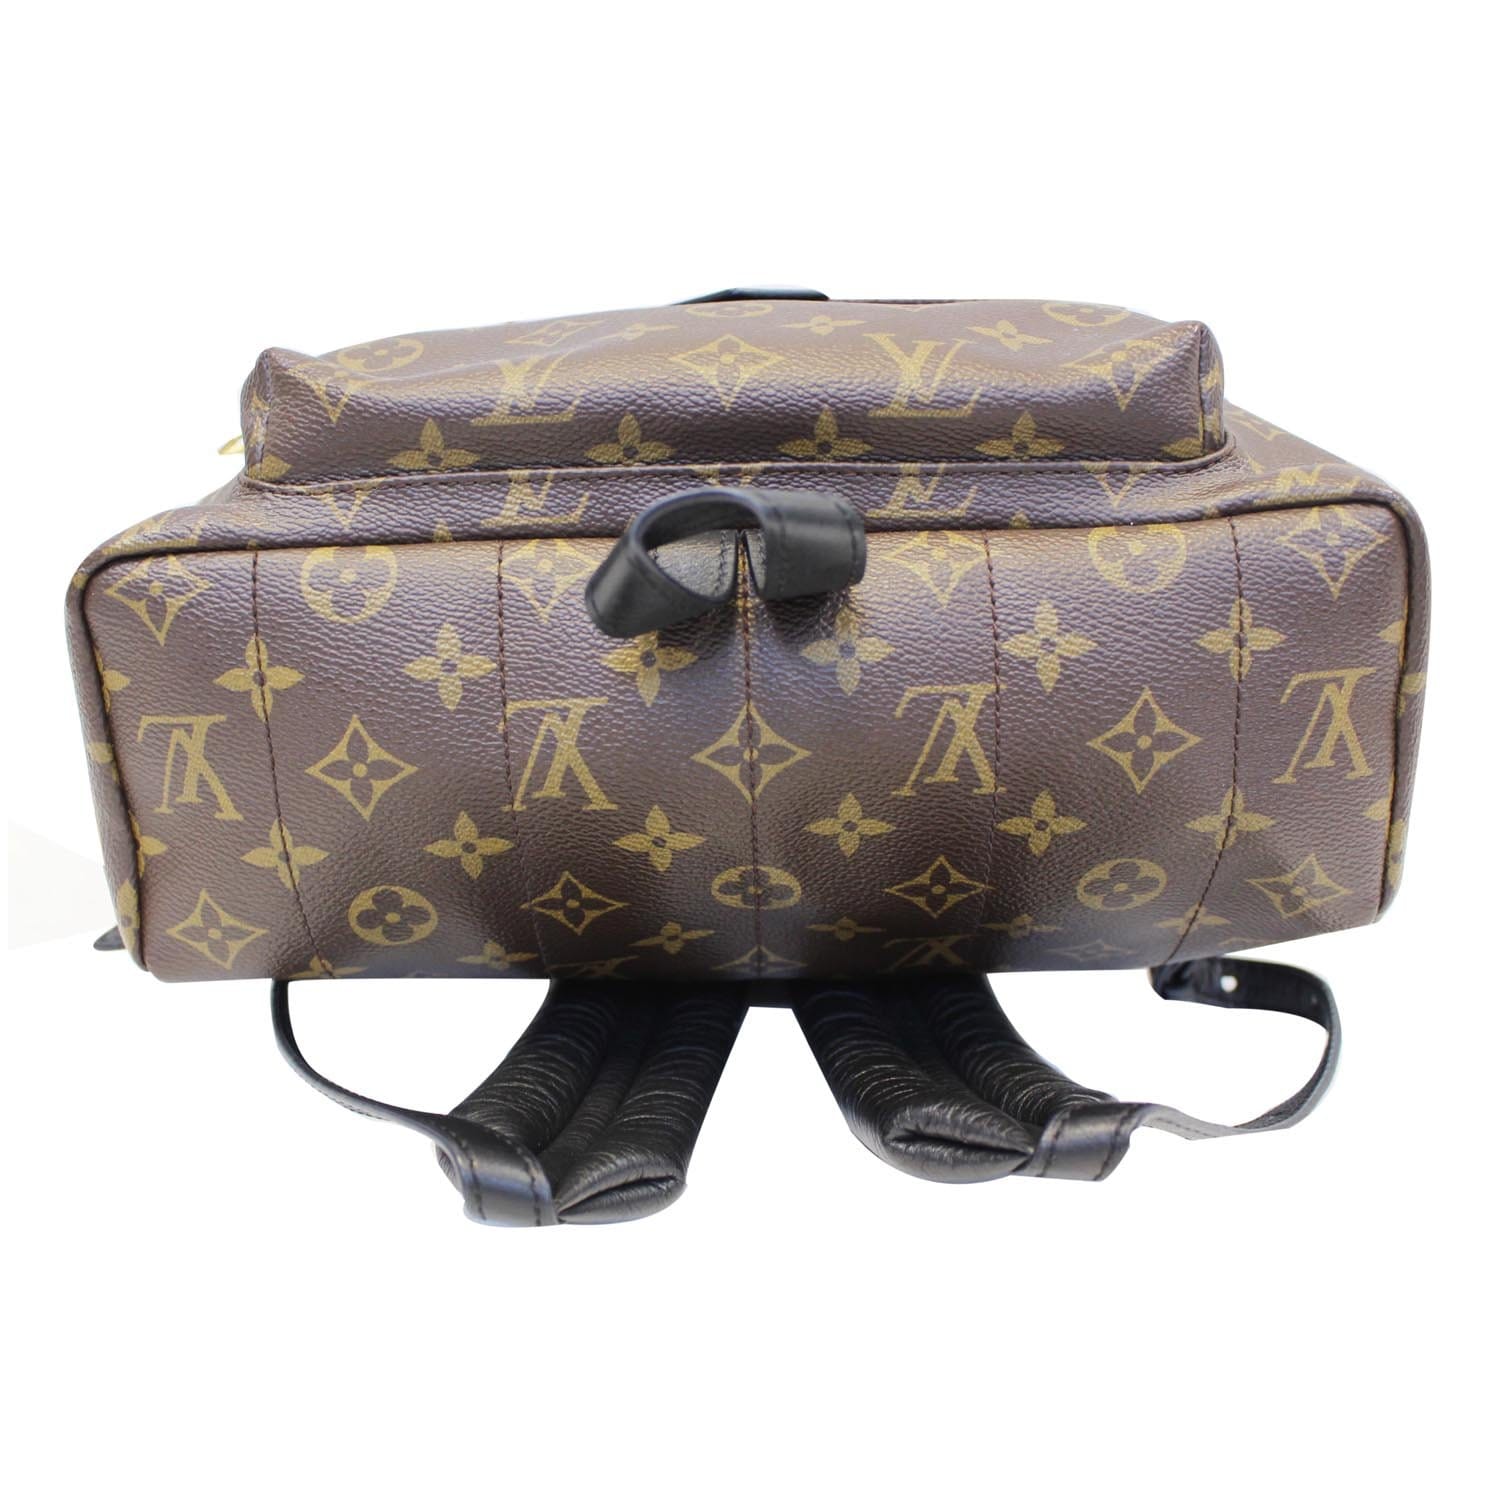 Louis Vuitton Monogram Palm Springs Backpack mm by Ann's Fabulous Finds